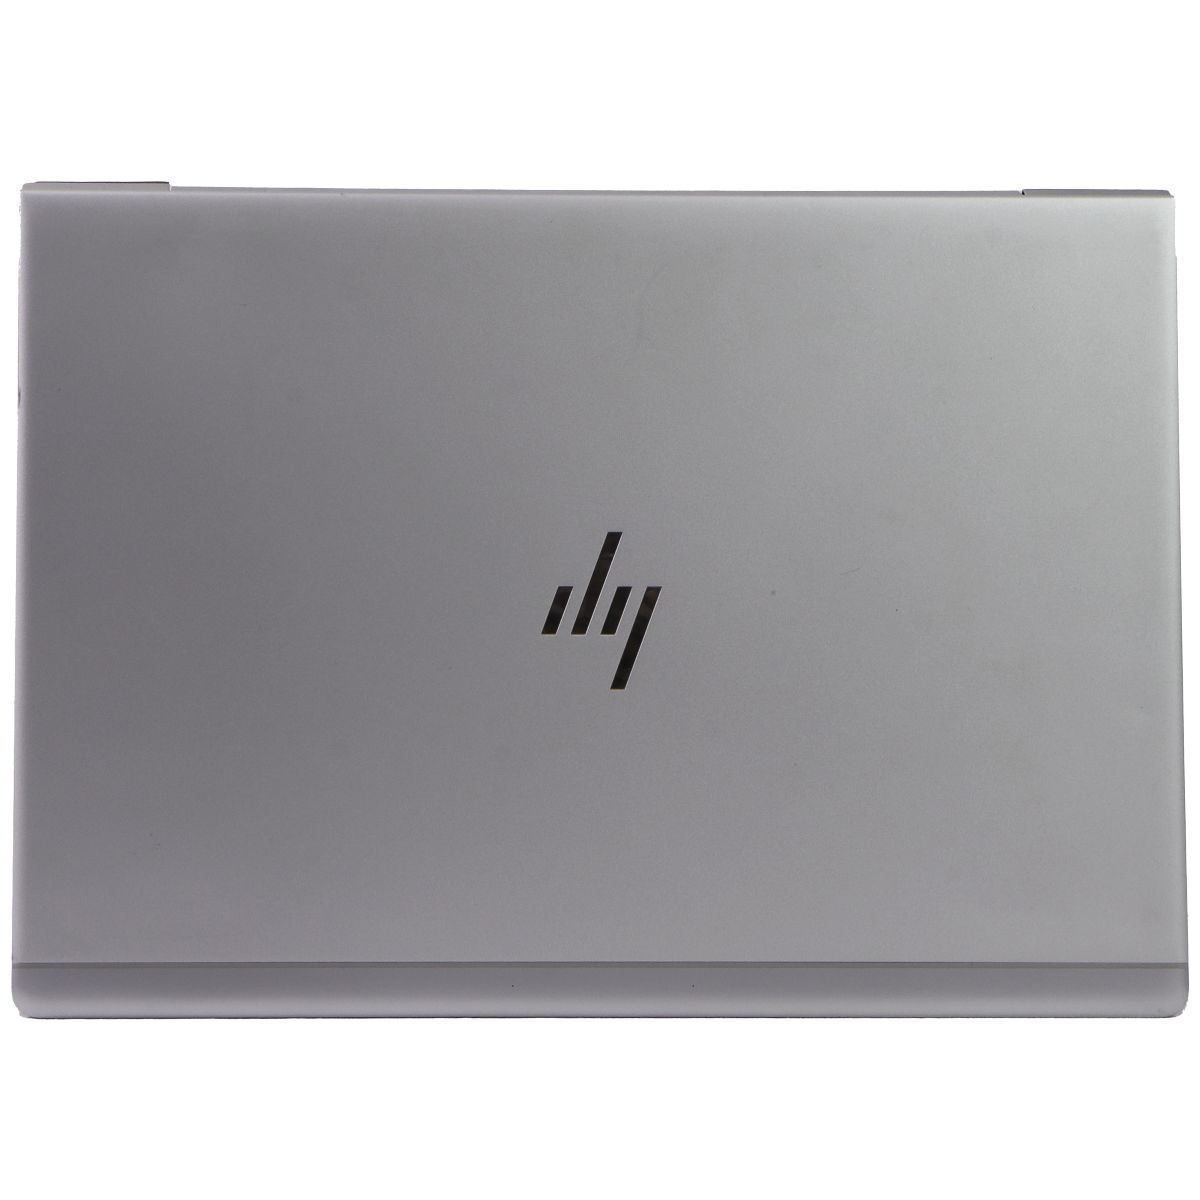 HP EliteBook 840 G6 (14-in) FHD Touch Laptop (HSN-I24C-4) i5-8265U/256GB/8GB/Pro Laptops - PC Laptops & Netbooks HP    - Simple Cell Bulk Wholesale Pricing - USA Seller